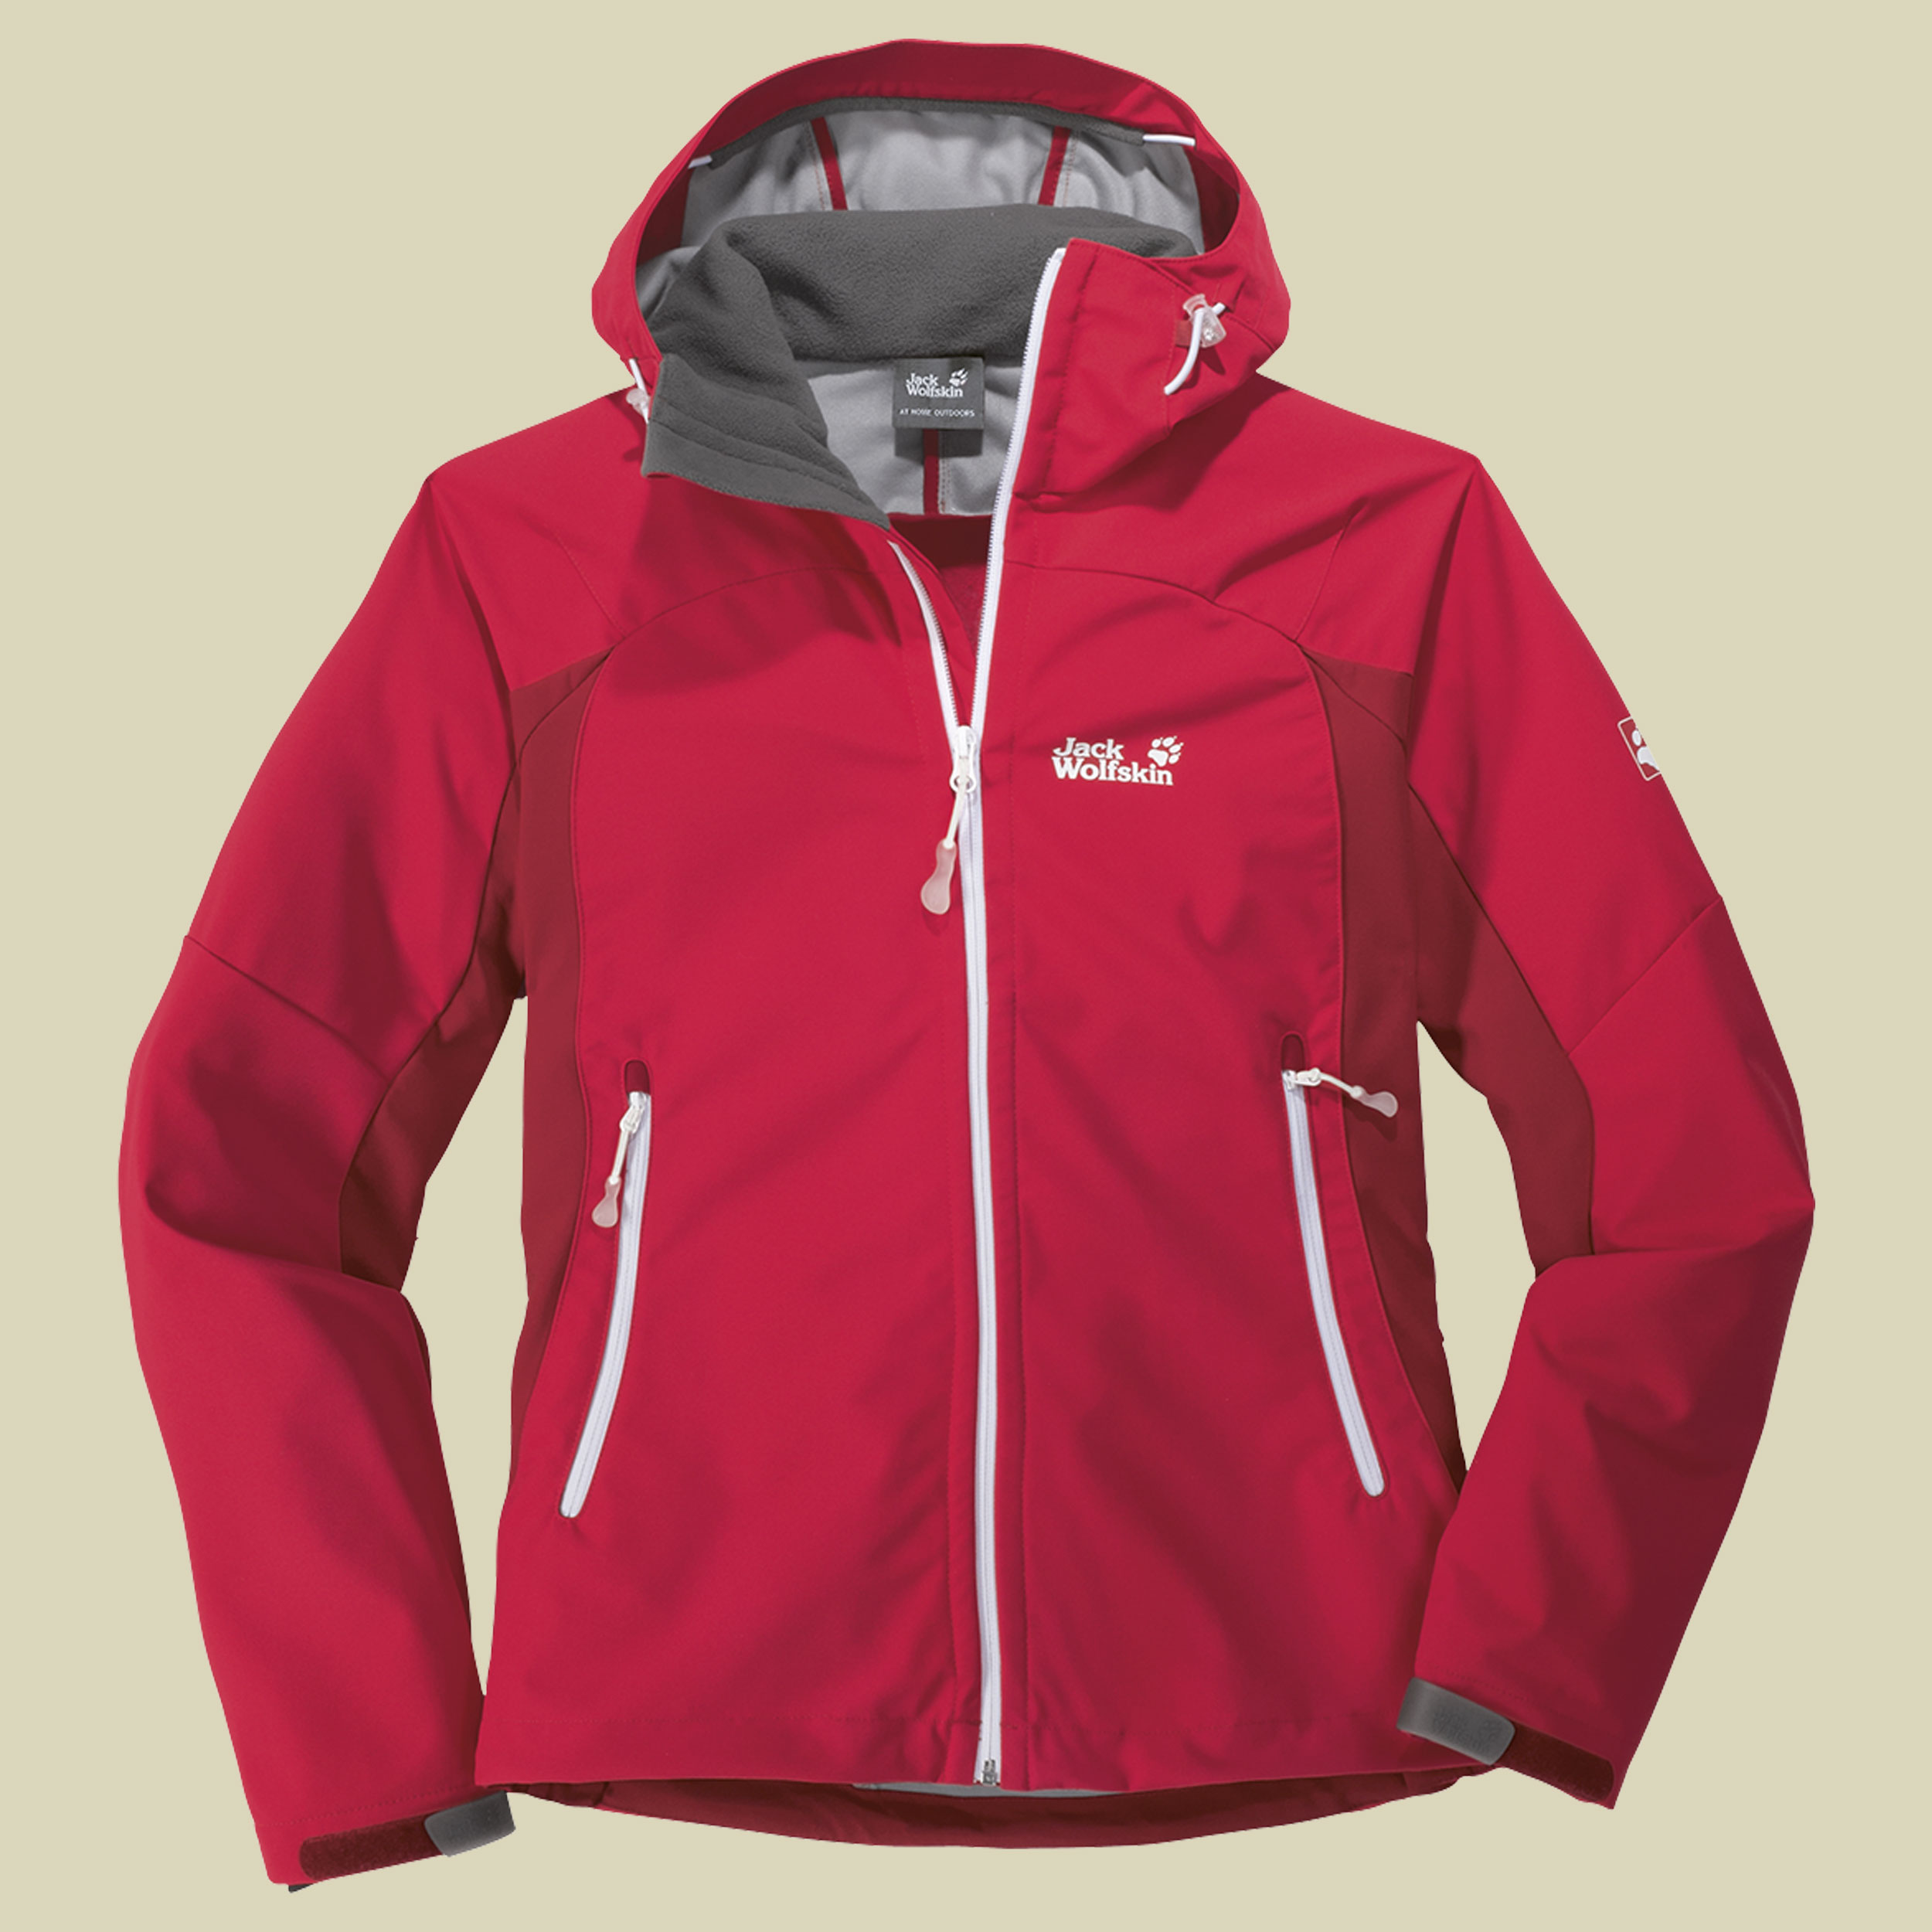 Nucleon Jacket Women Größe S Farbe clear red